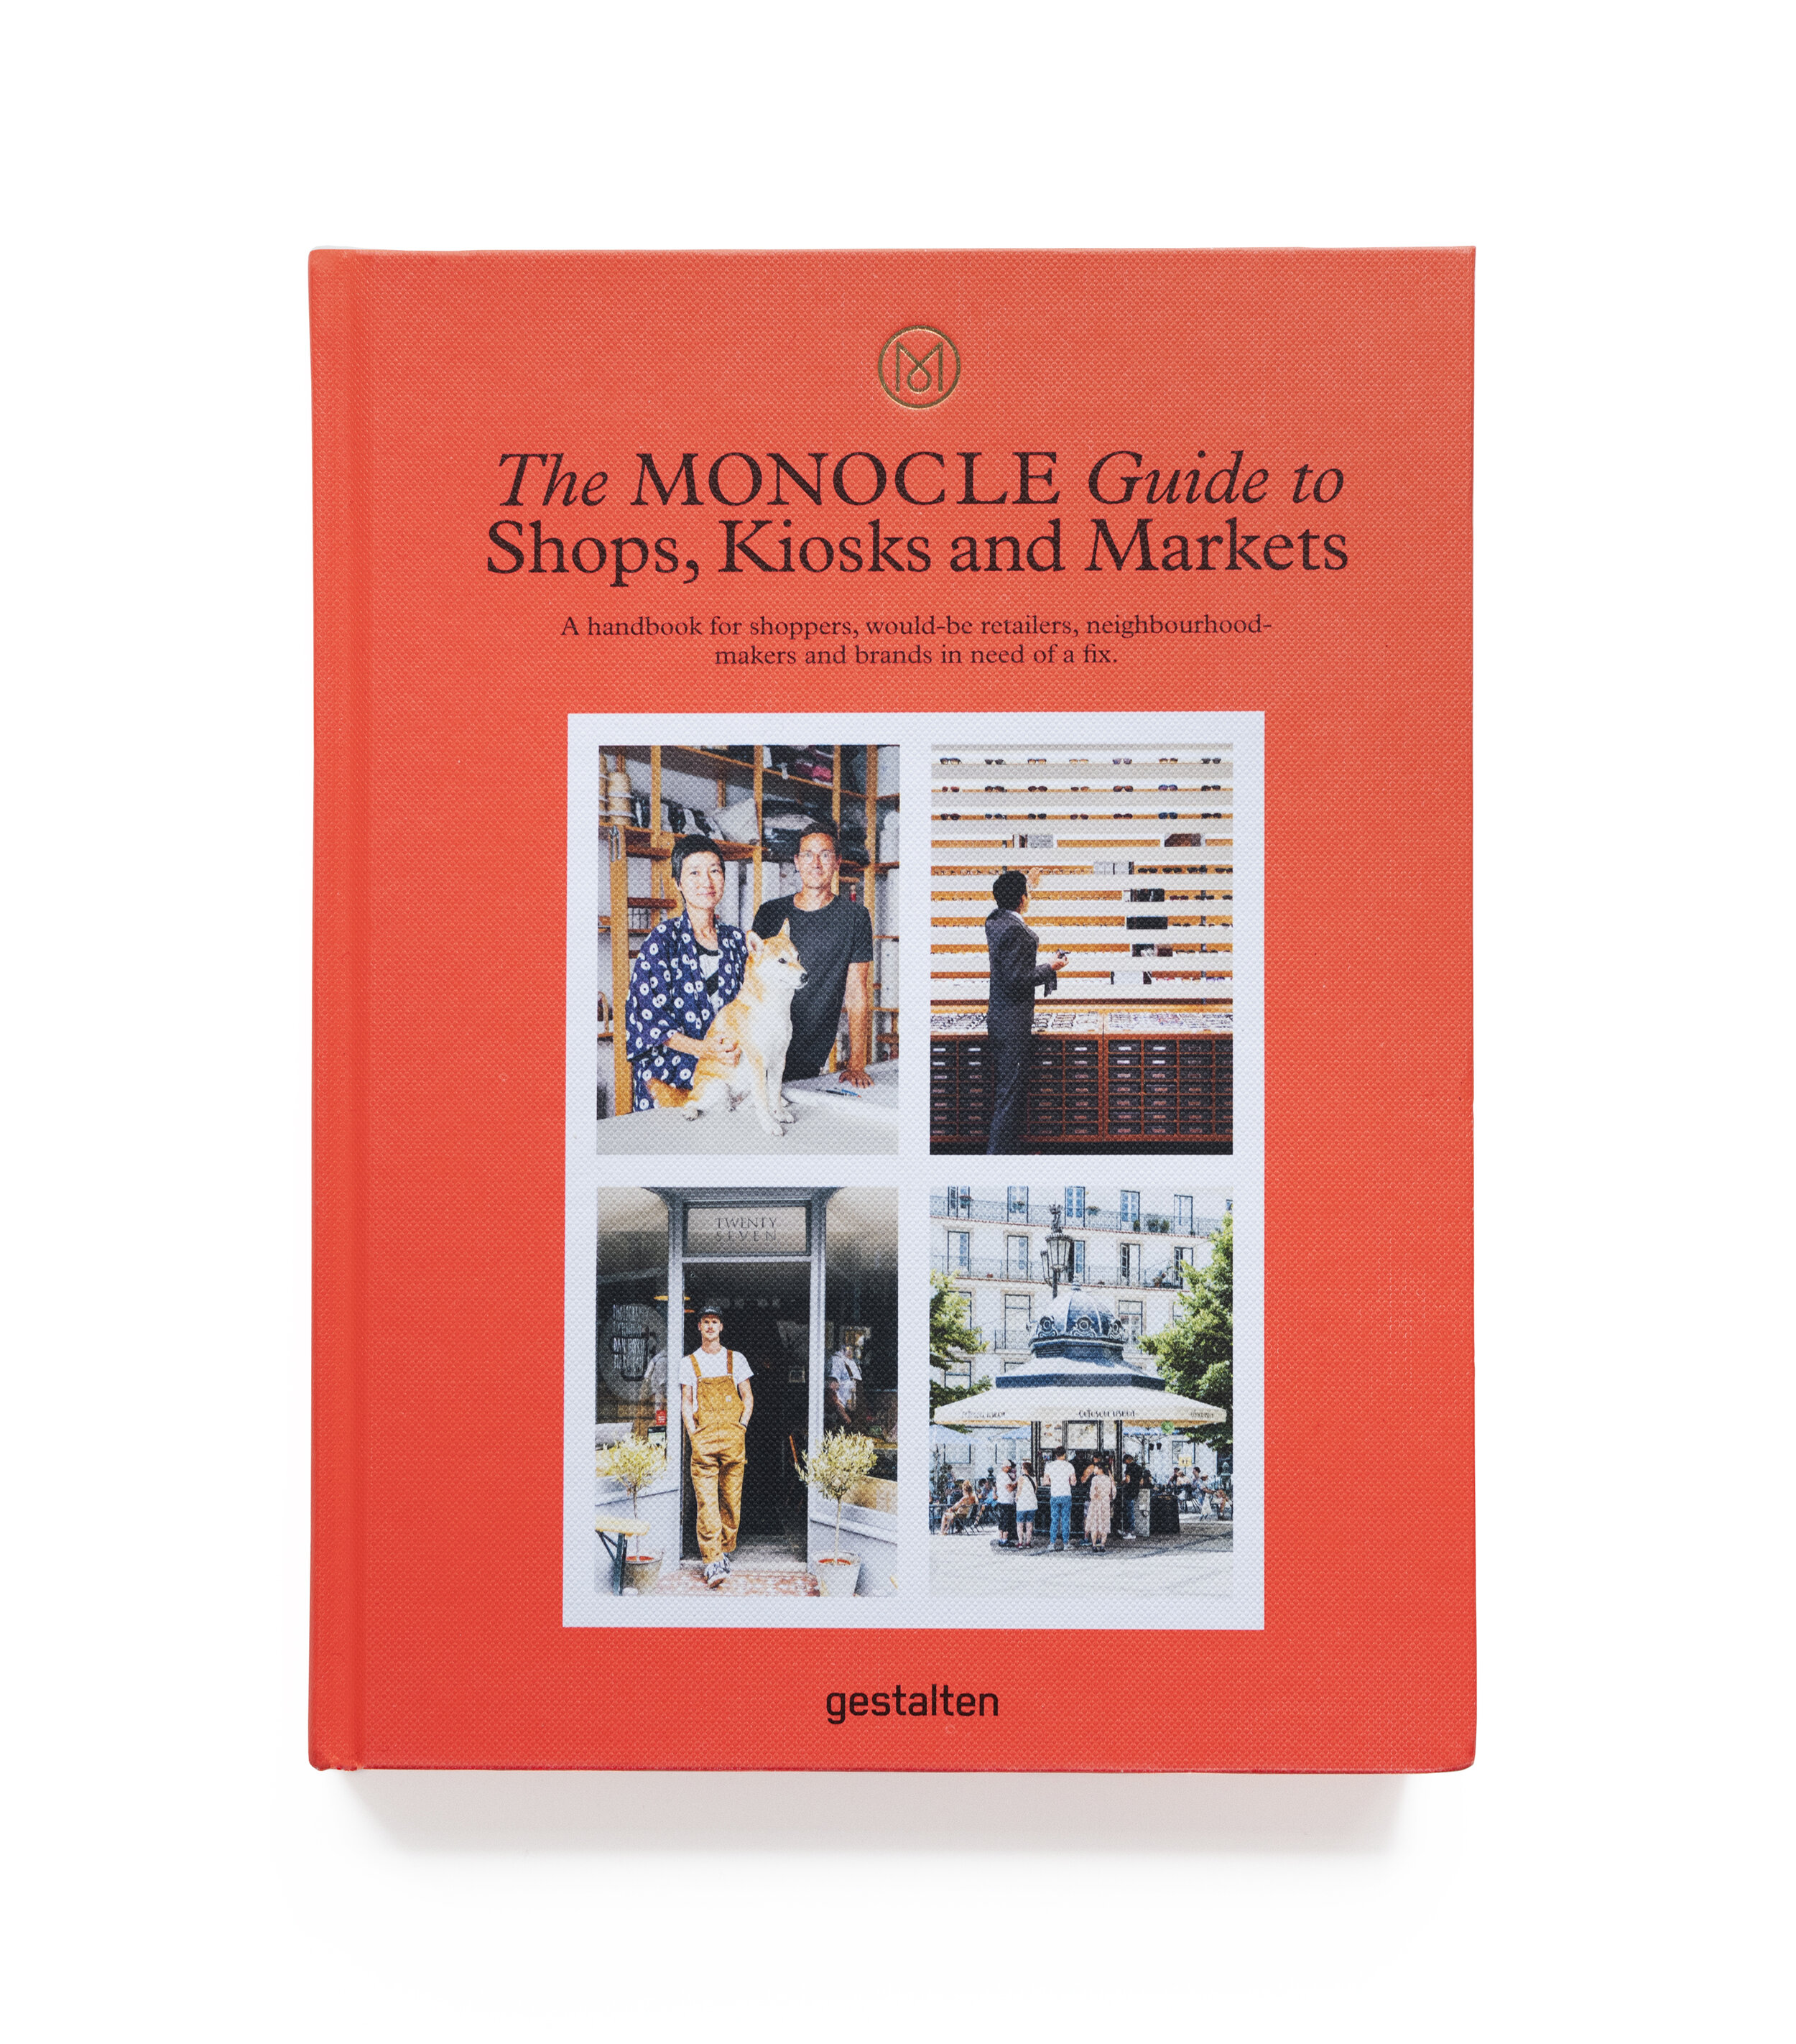  The MONOCLE Guide to Shops, Kiosks and Markets | Voskins 